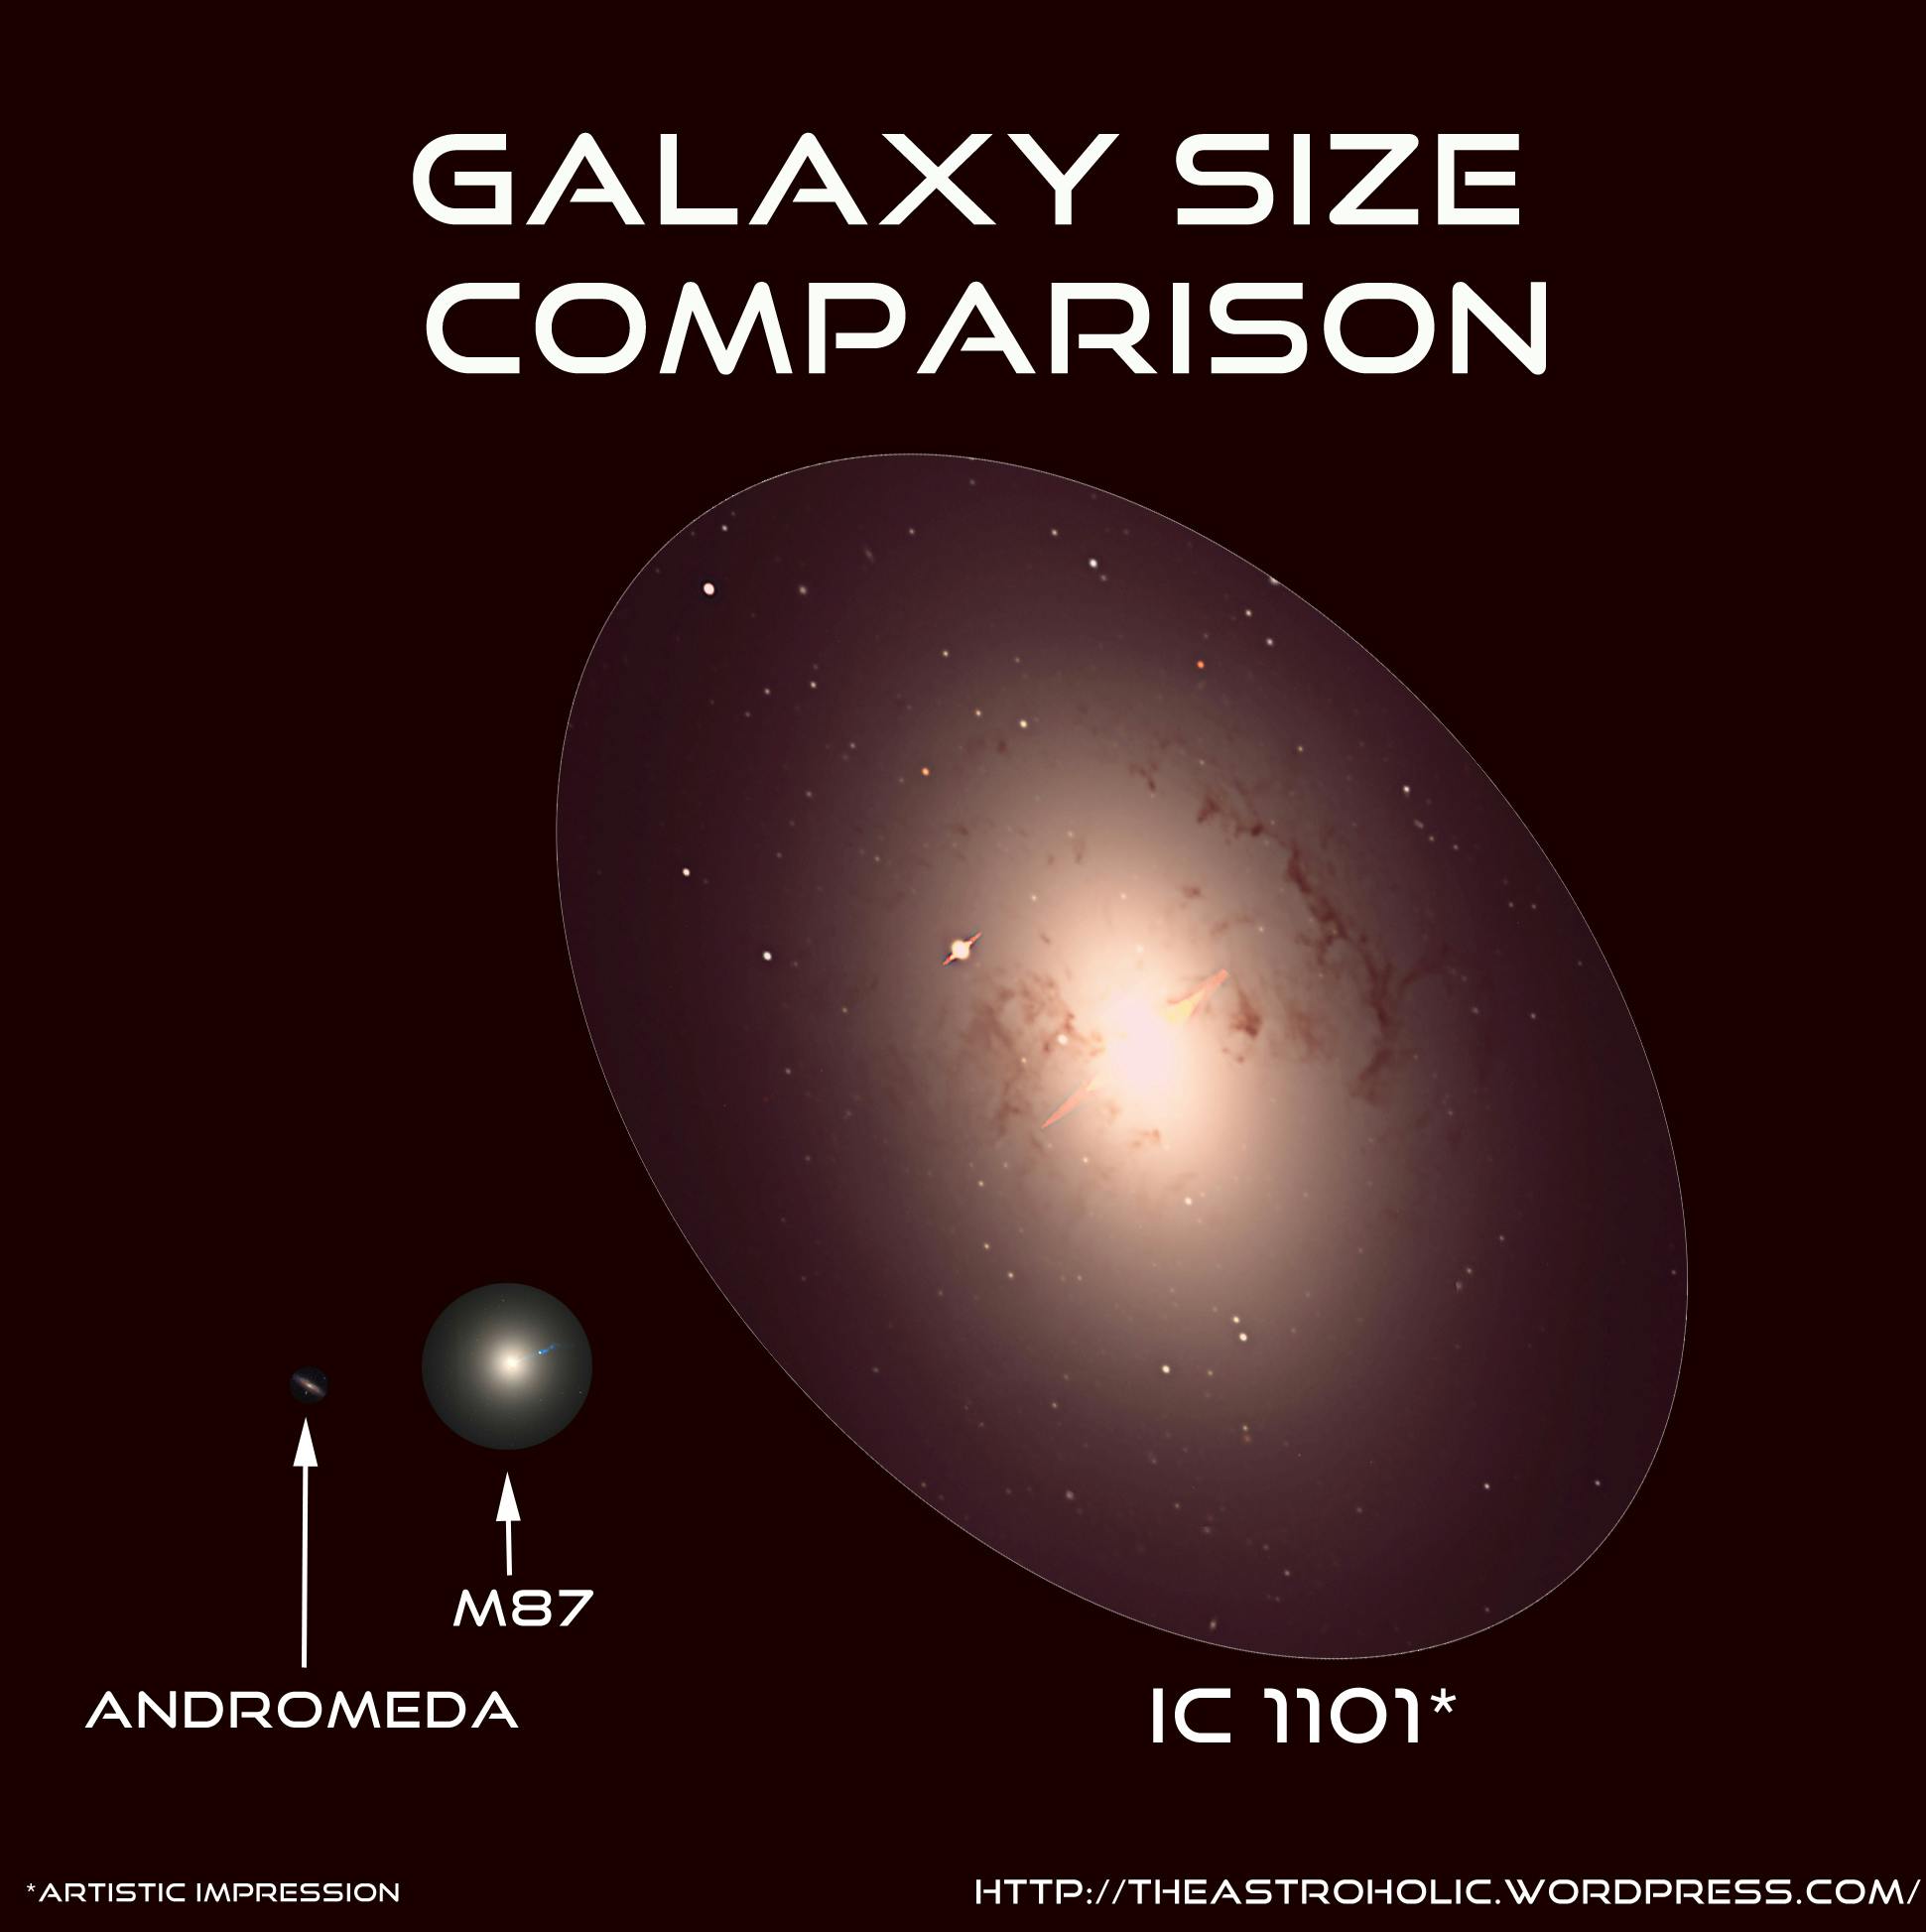 How big is the biggest galaxy in the Universe?